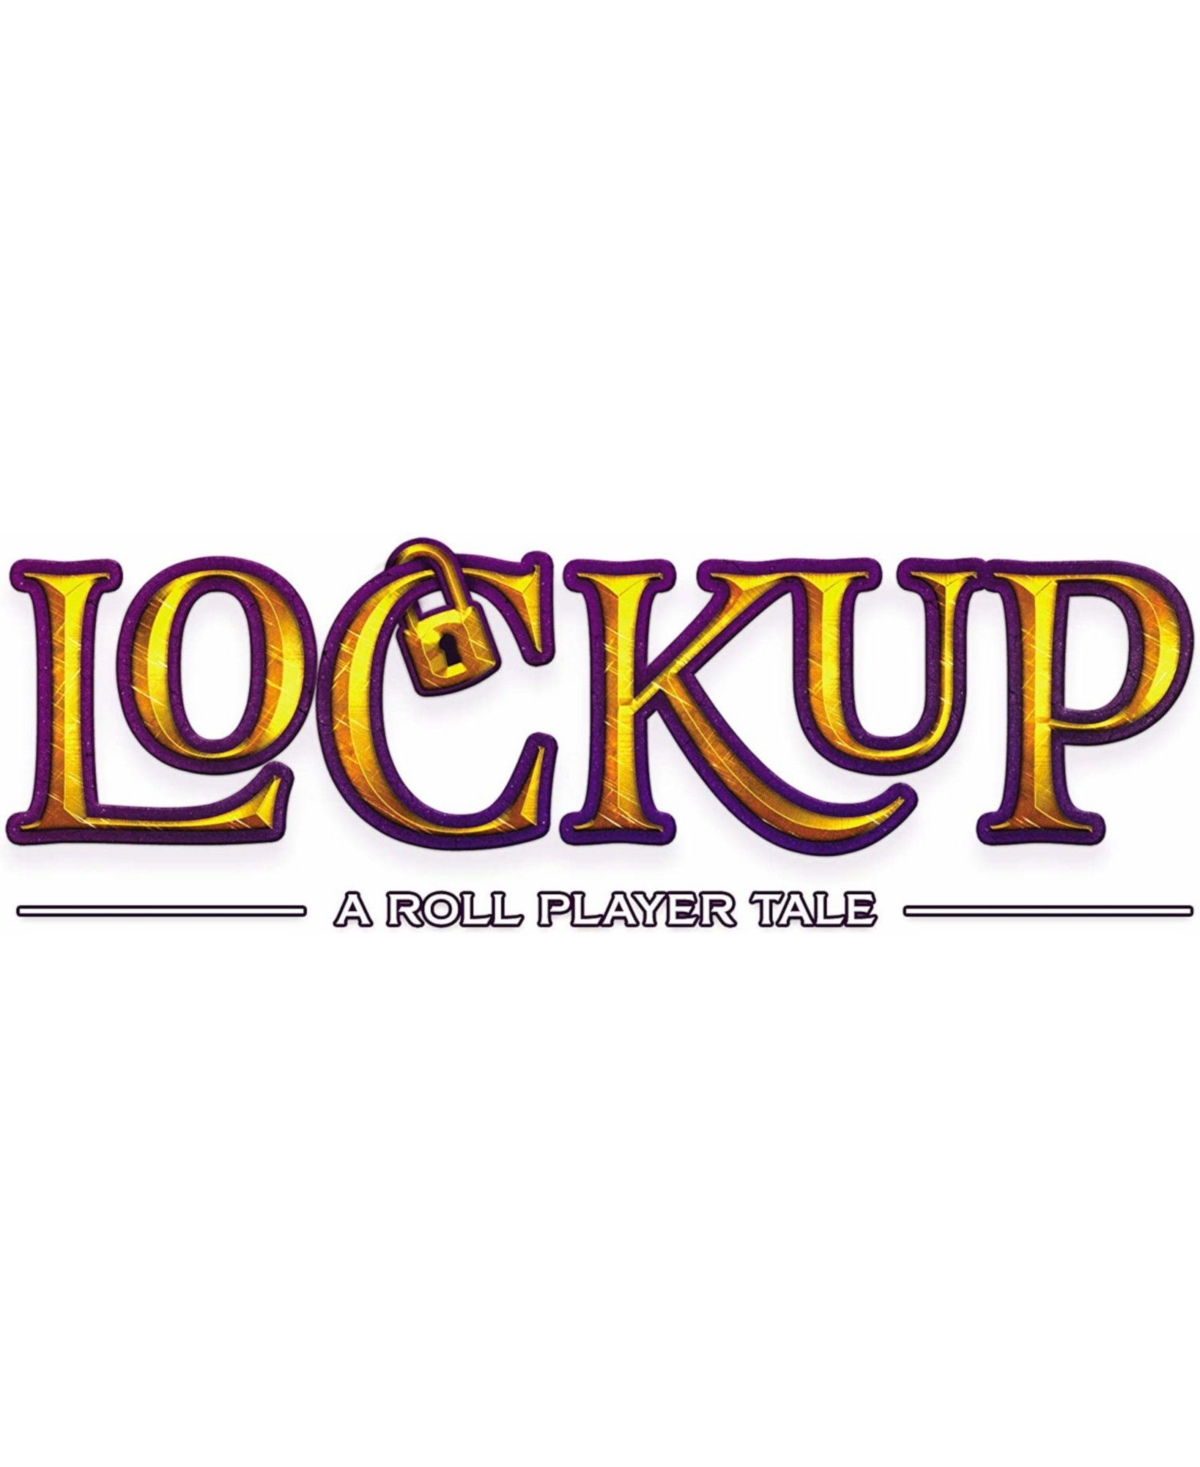 Shop Masterpieces Puzzles Flat River Group Thunderworks Games Lockup- A Roll Player Tale Competitive Worker-allocation Game In Multi